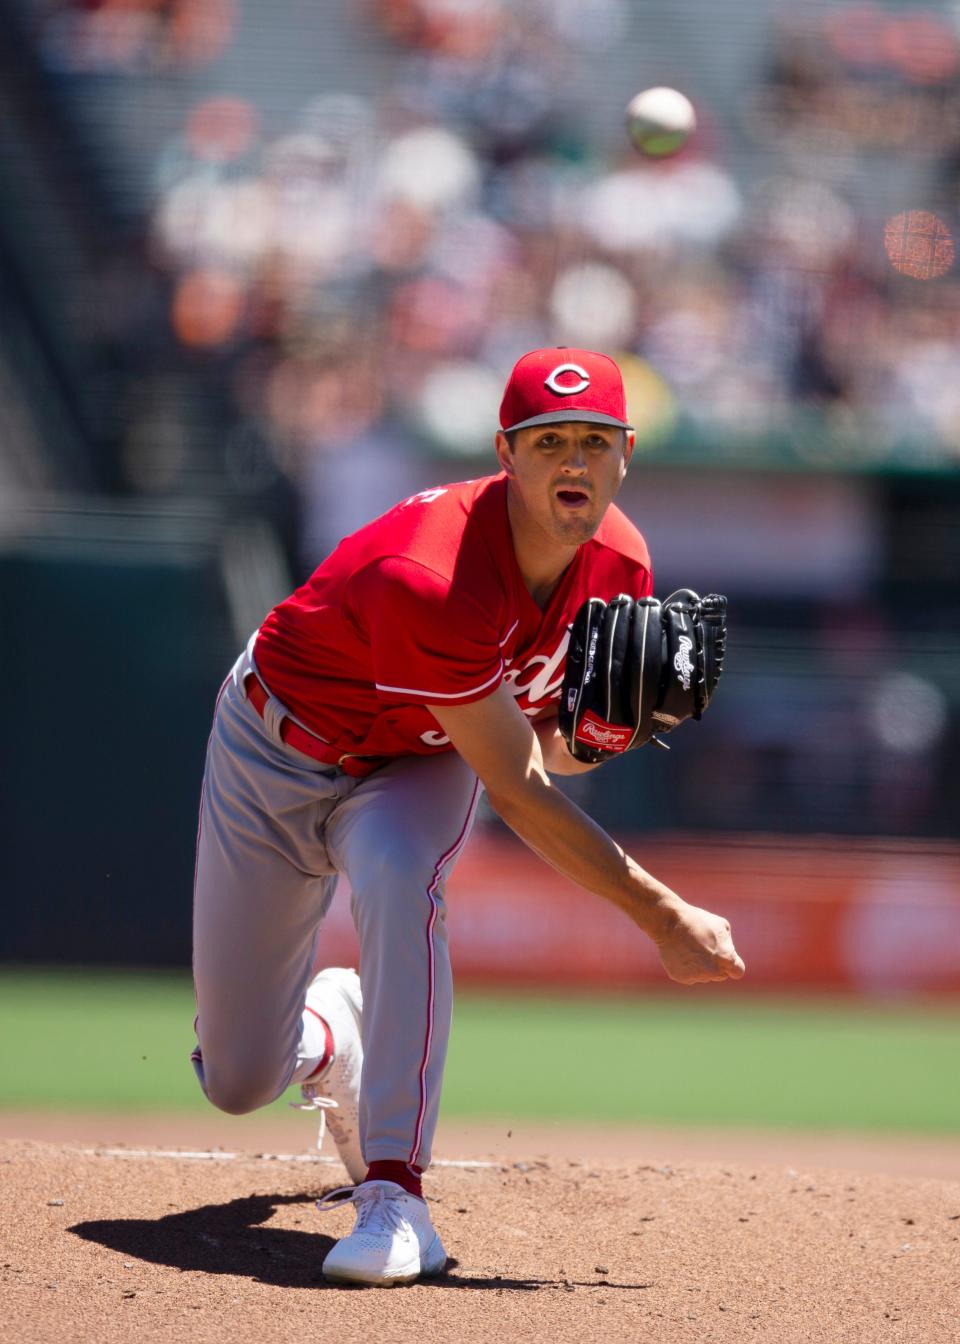 Jun 26, 2022; San Francisco, California, USA; Cincinnati Reds starting pitcher Tyler Mahle (30) delivers a pitch against the San Francisco Giants during the first inning at Oracle Park. Mandatory Credit: D. Ross Cameron-USA TODAY Sports